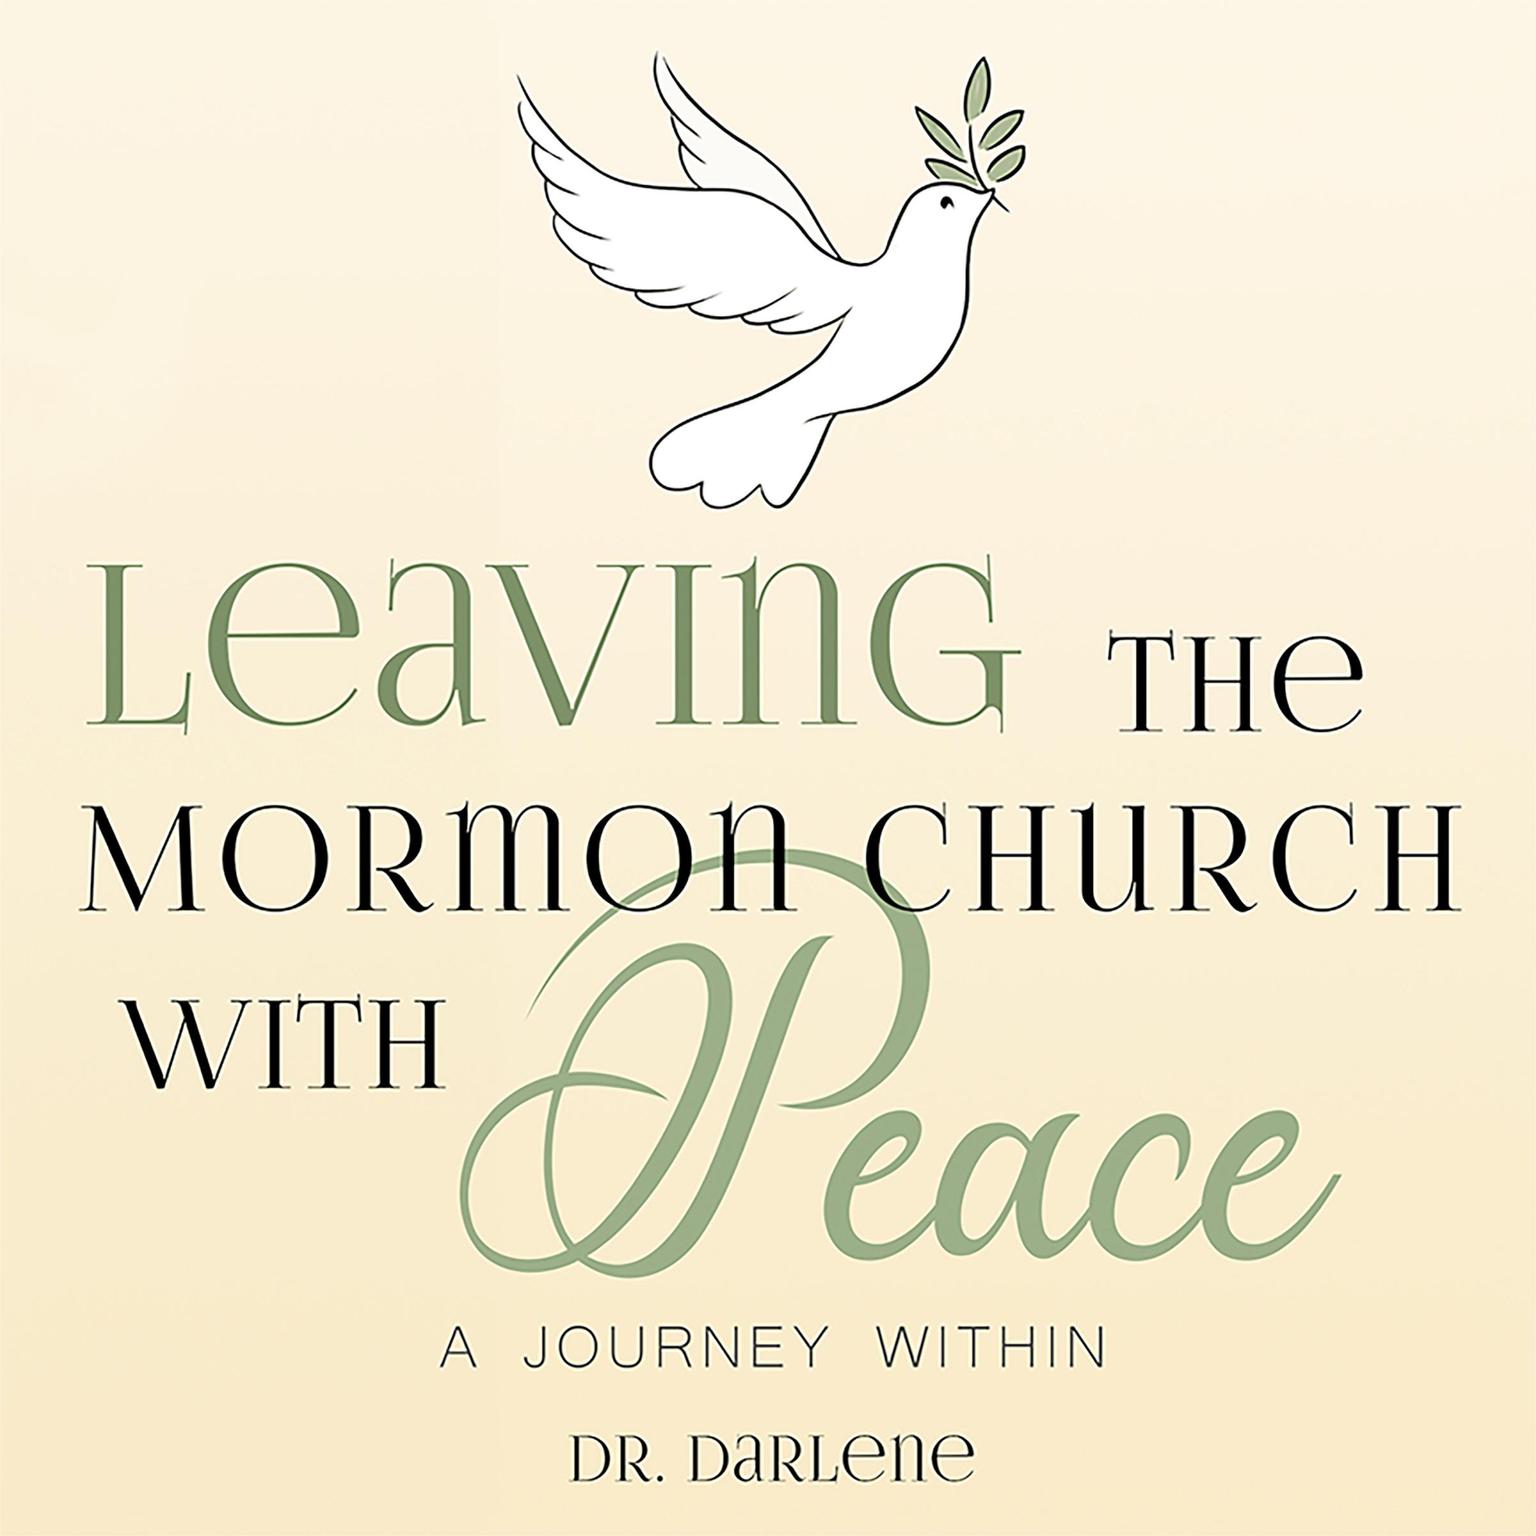 Leaving the Mormon Church With Peace Audiobook, by Darlene Taylor